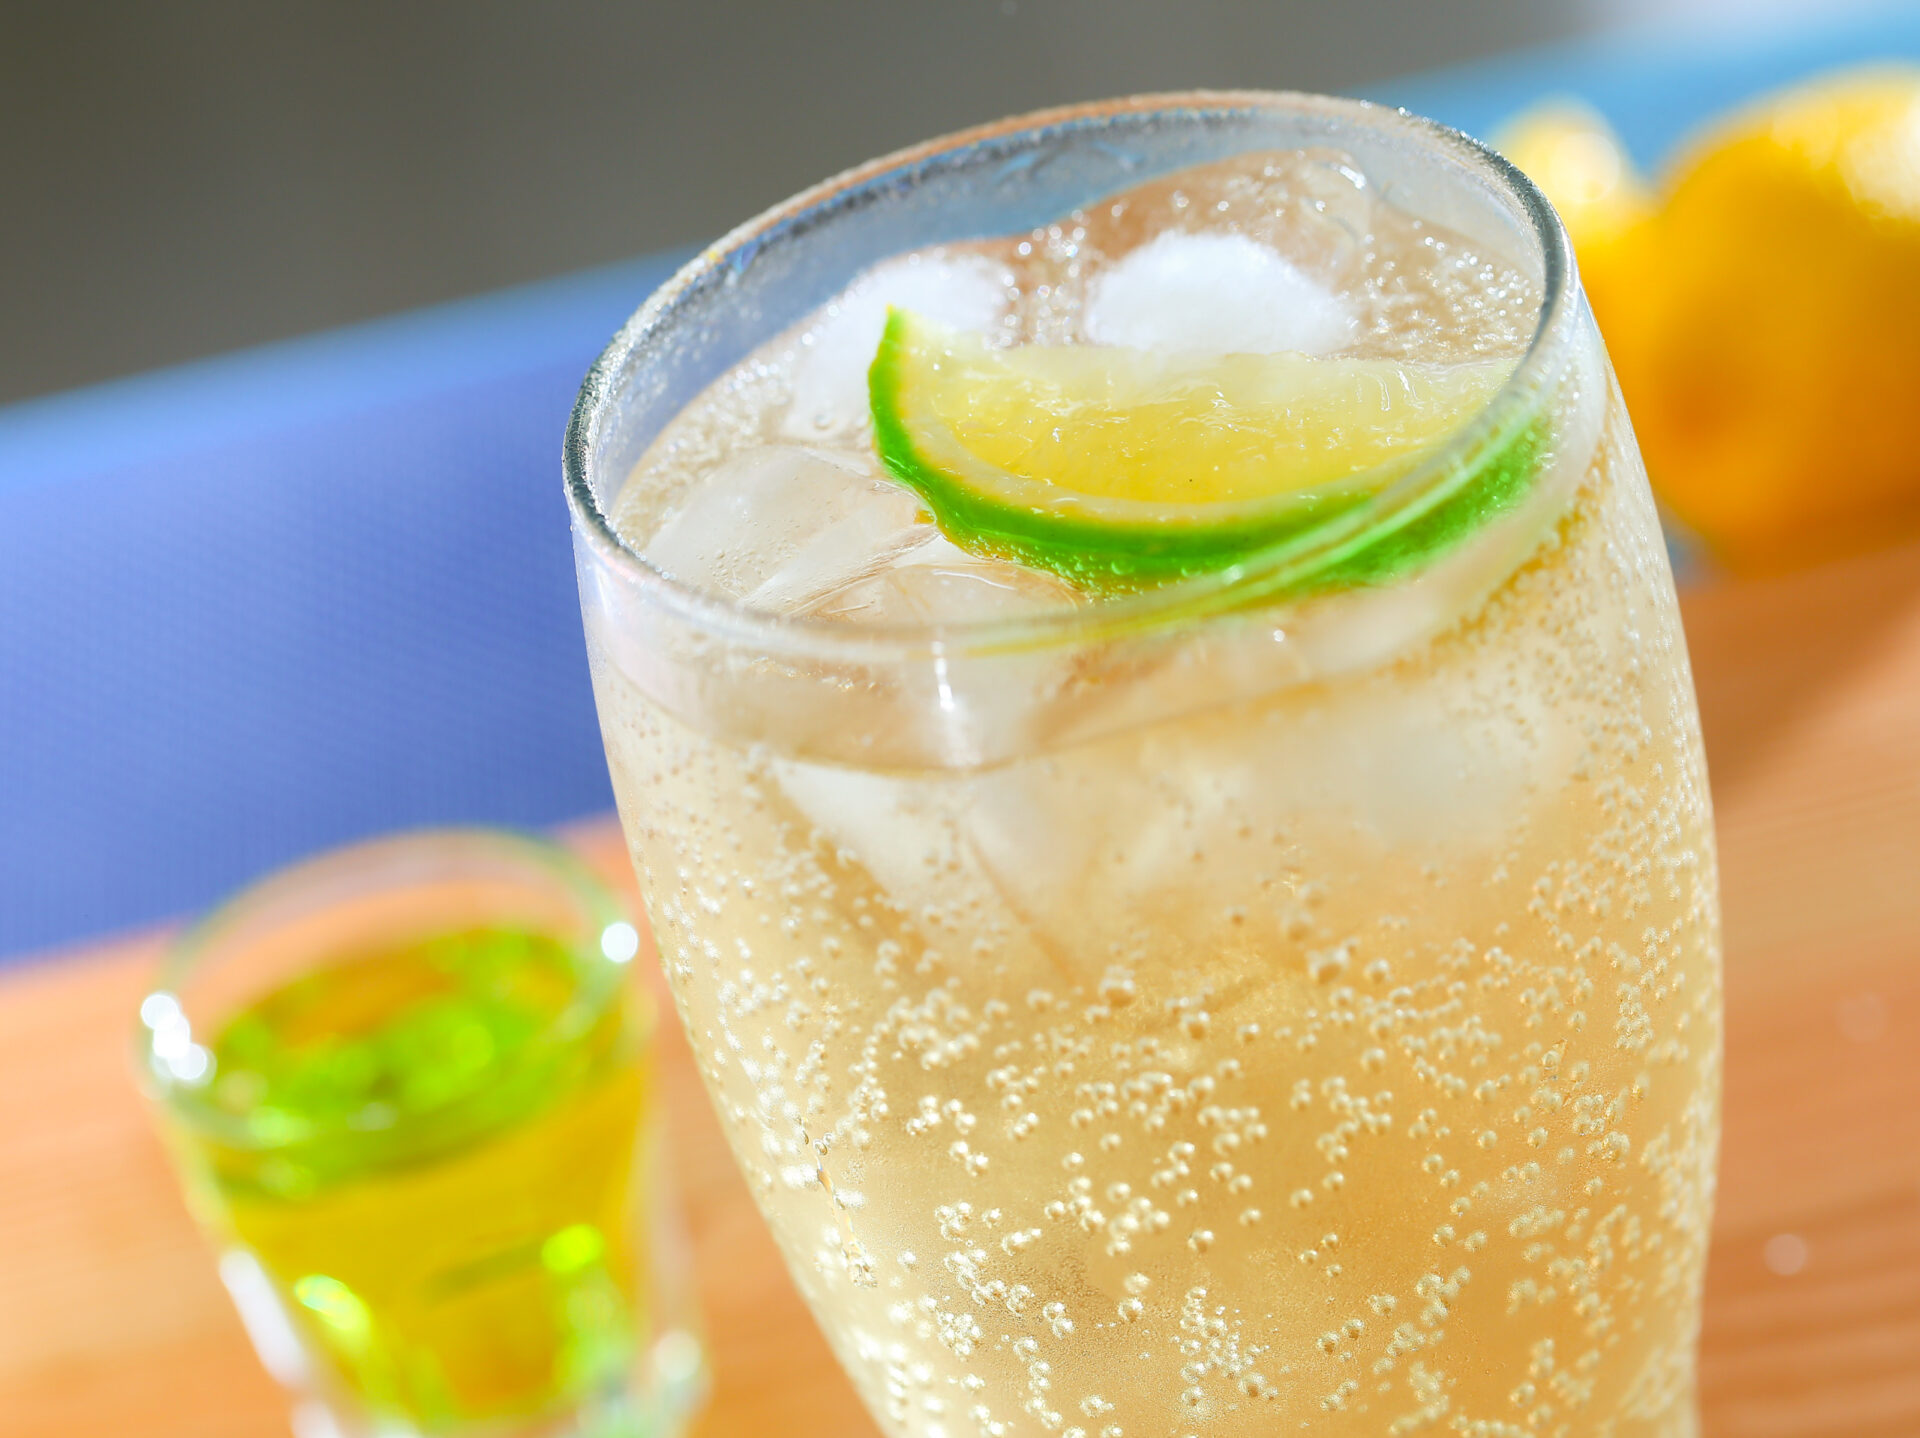 Ginger Ale Market Future Aspect Analysis and Current Trends by 2017 to 2032